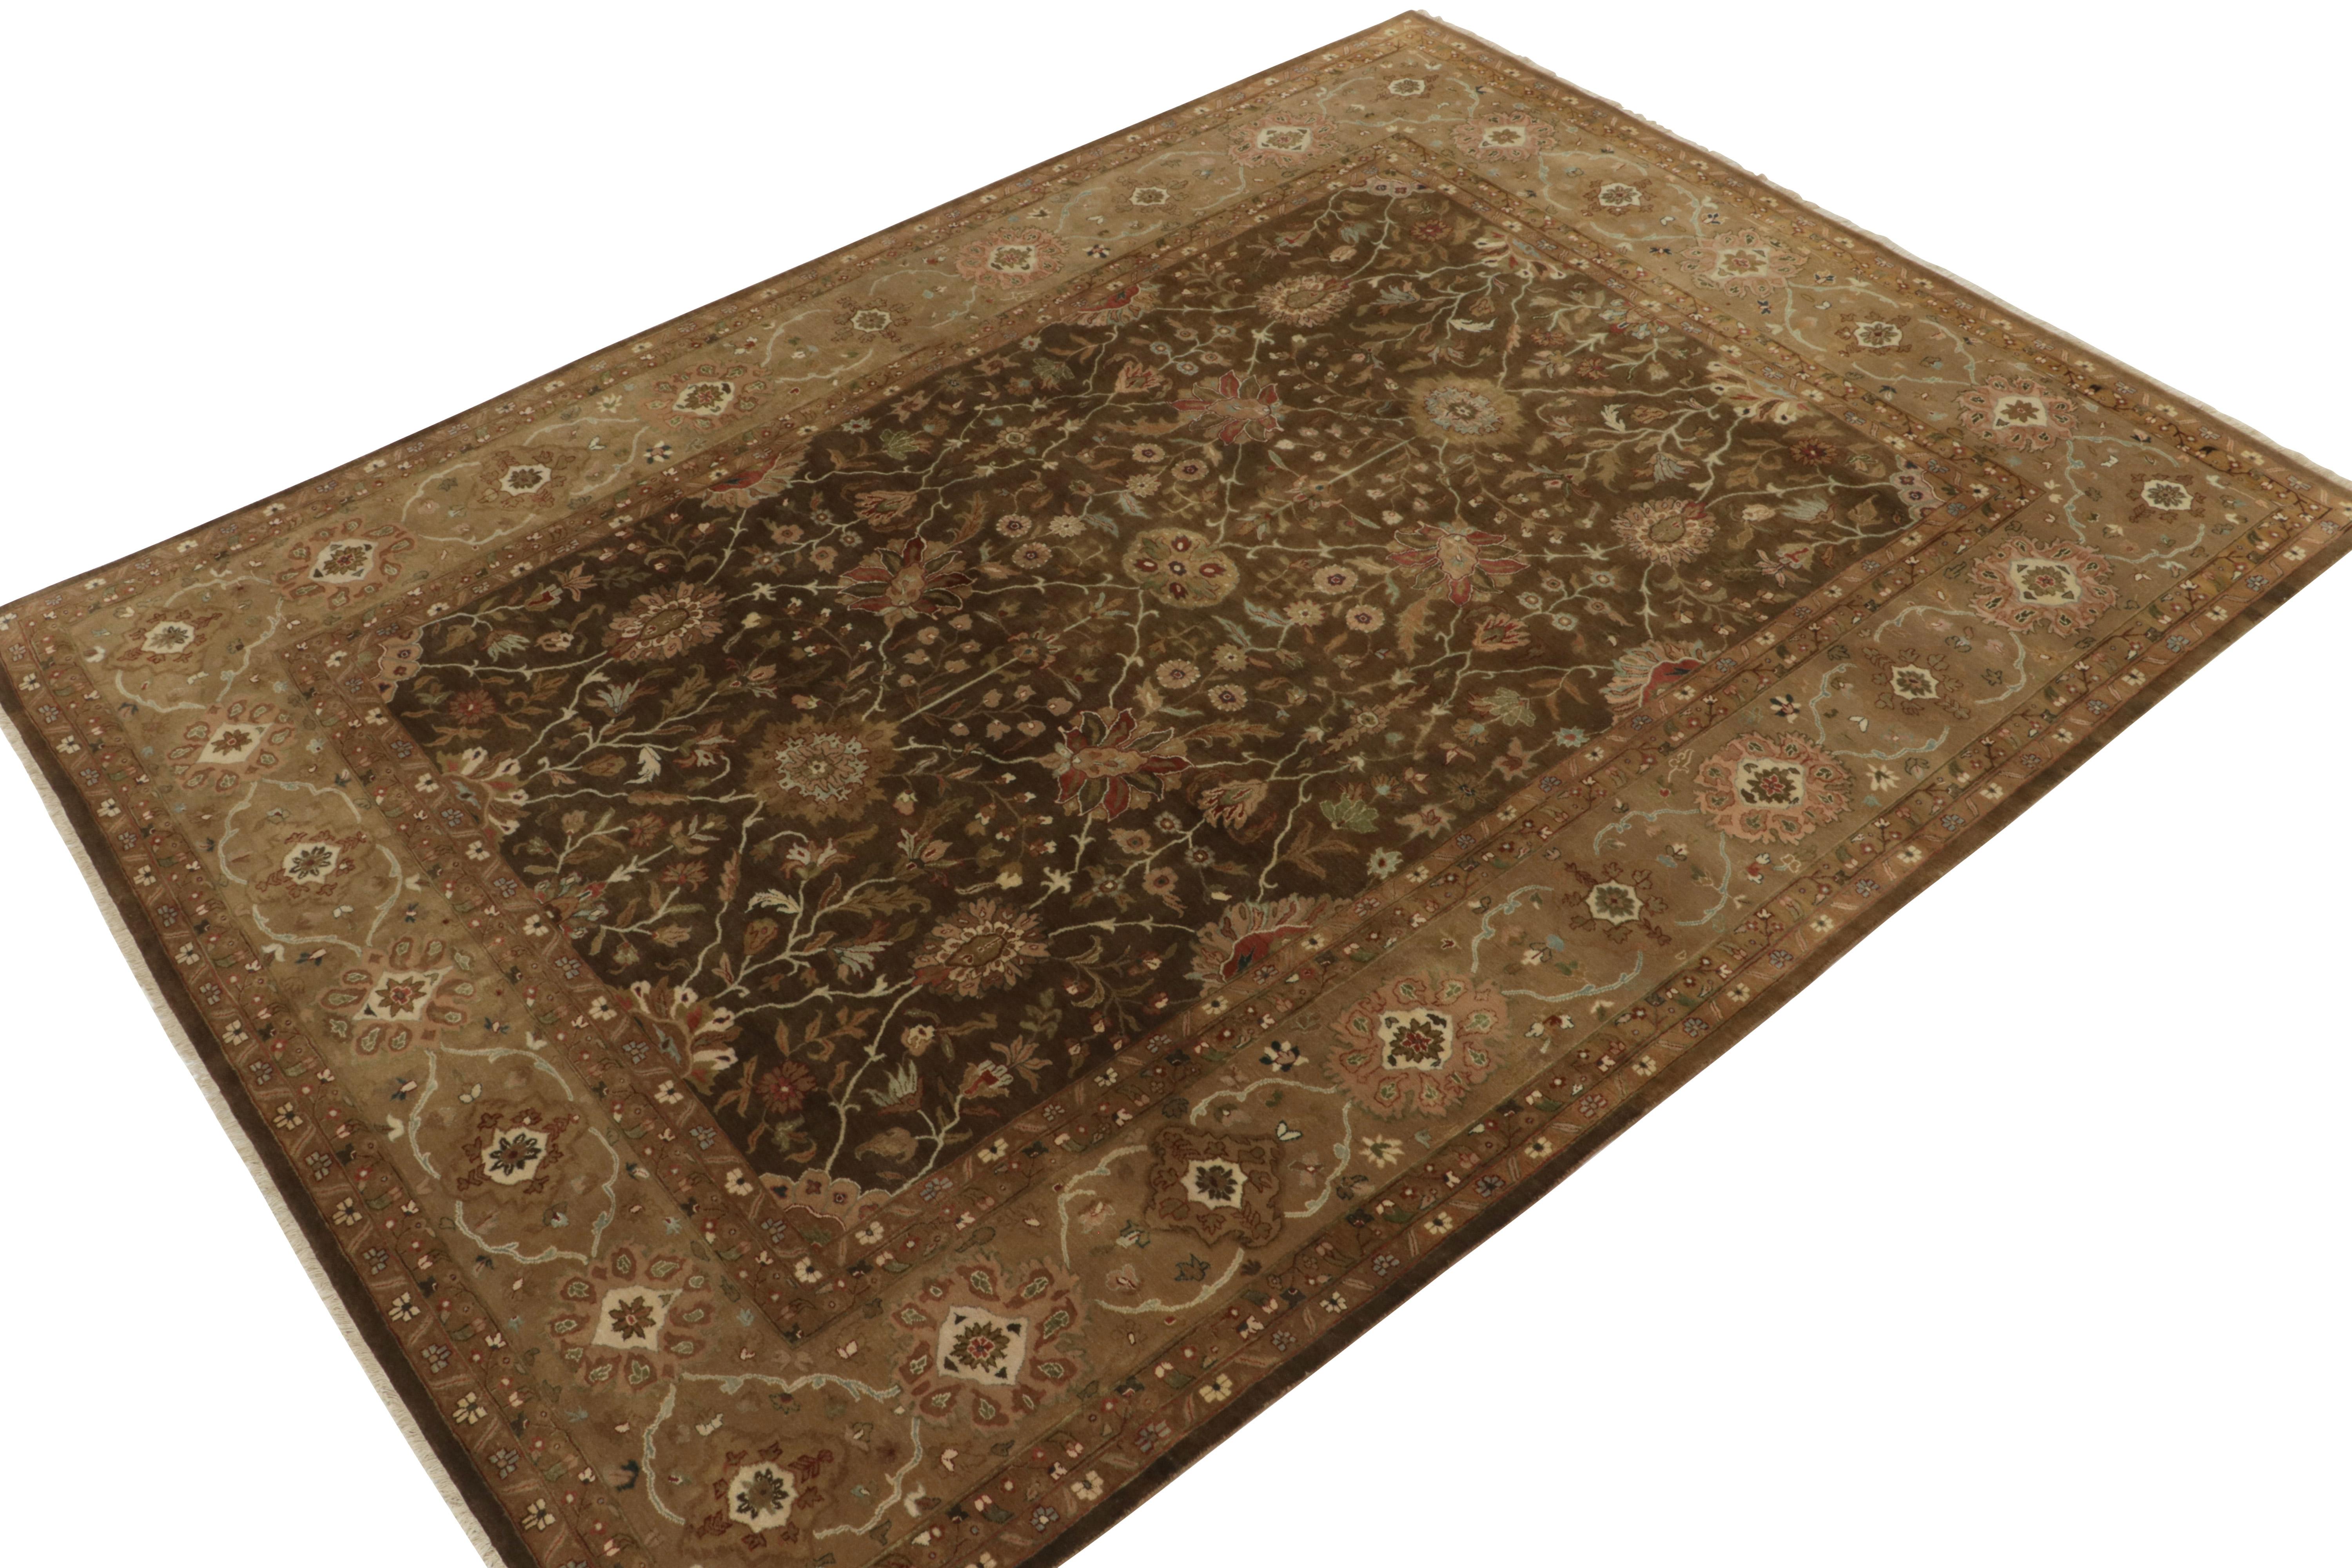 Hand-knotted in wool & silk, this 9x12 contemporary rug from our Modern Classics collection is particularly inspired by antique Tabriz styles. 

Favoring the Herati pattern, the gracious scale enjoys elaborate florals in gold, green and red atop the